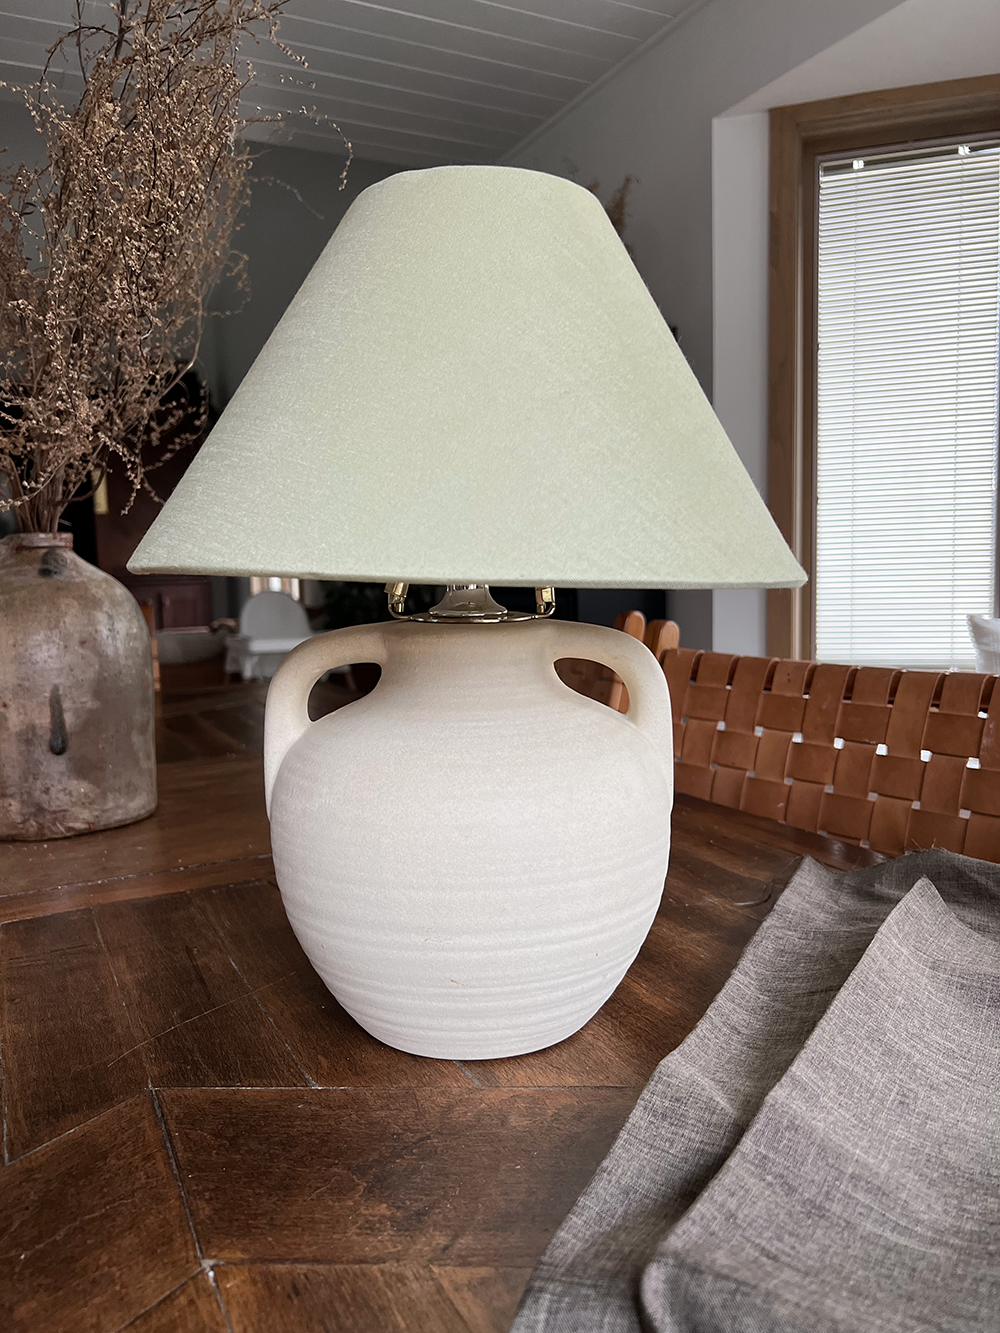 DIY Thrifted Lamp Shade Makeover